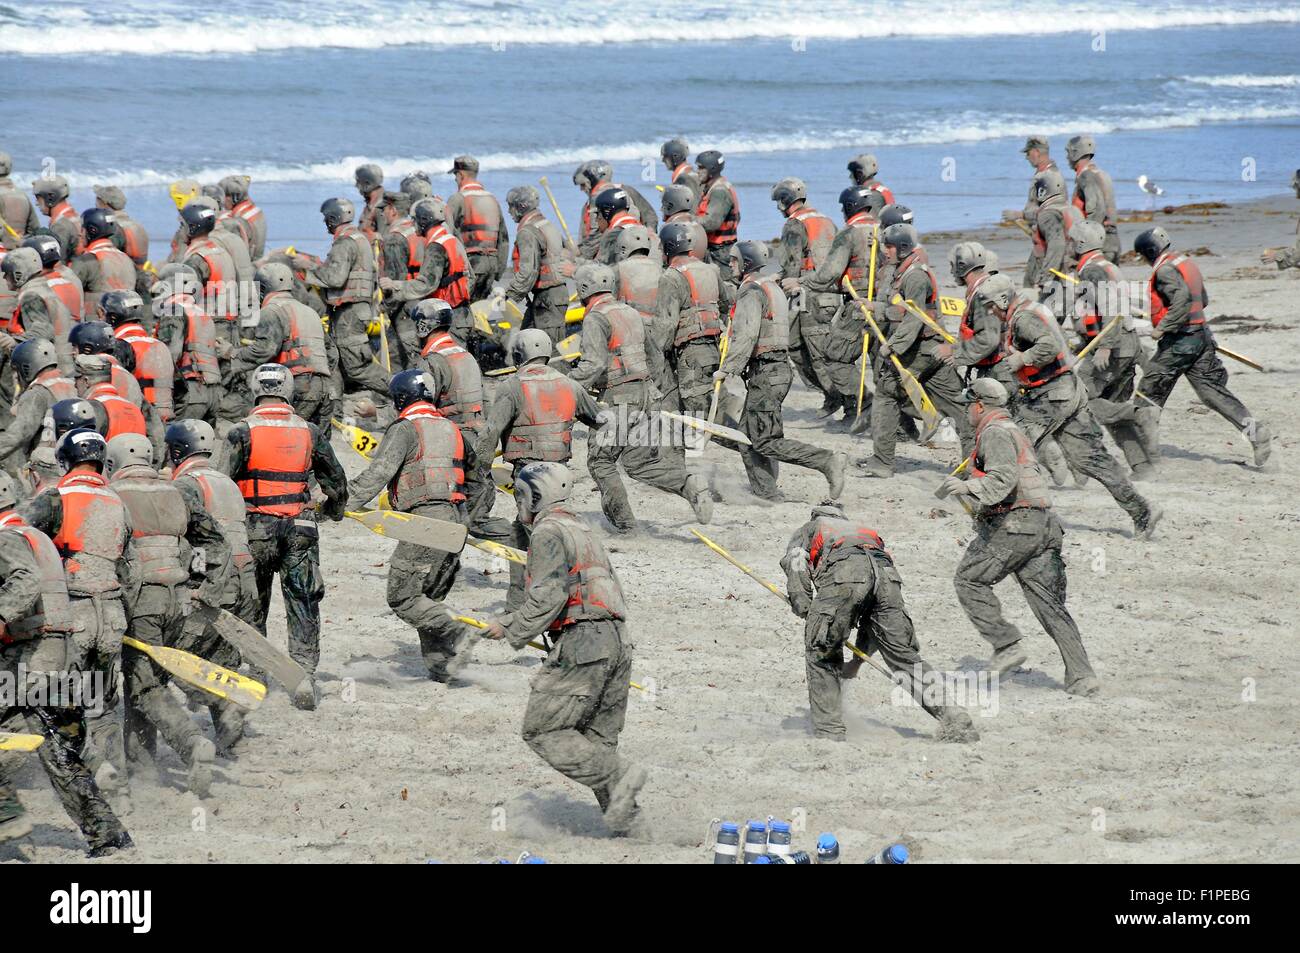 US Navy SEAL candidates cover themselves in sand during surf passage on Naval Amphibious Base Coronado September 2, 2015 in San Deigo, California. Stock Photo